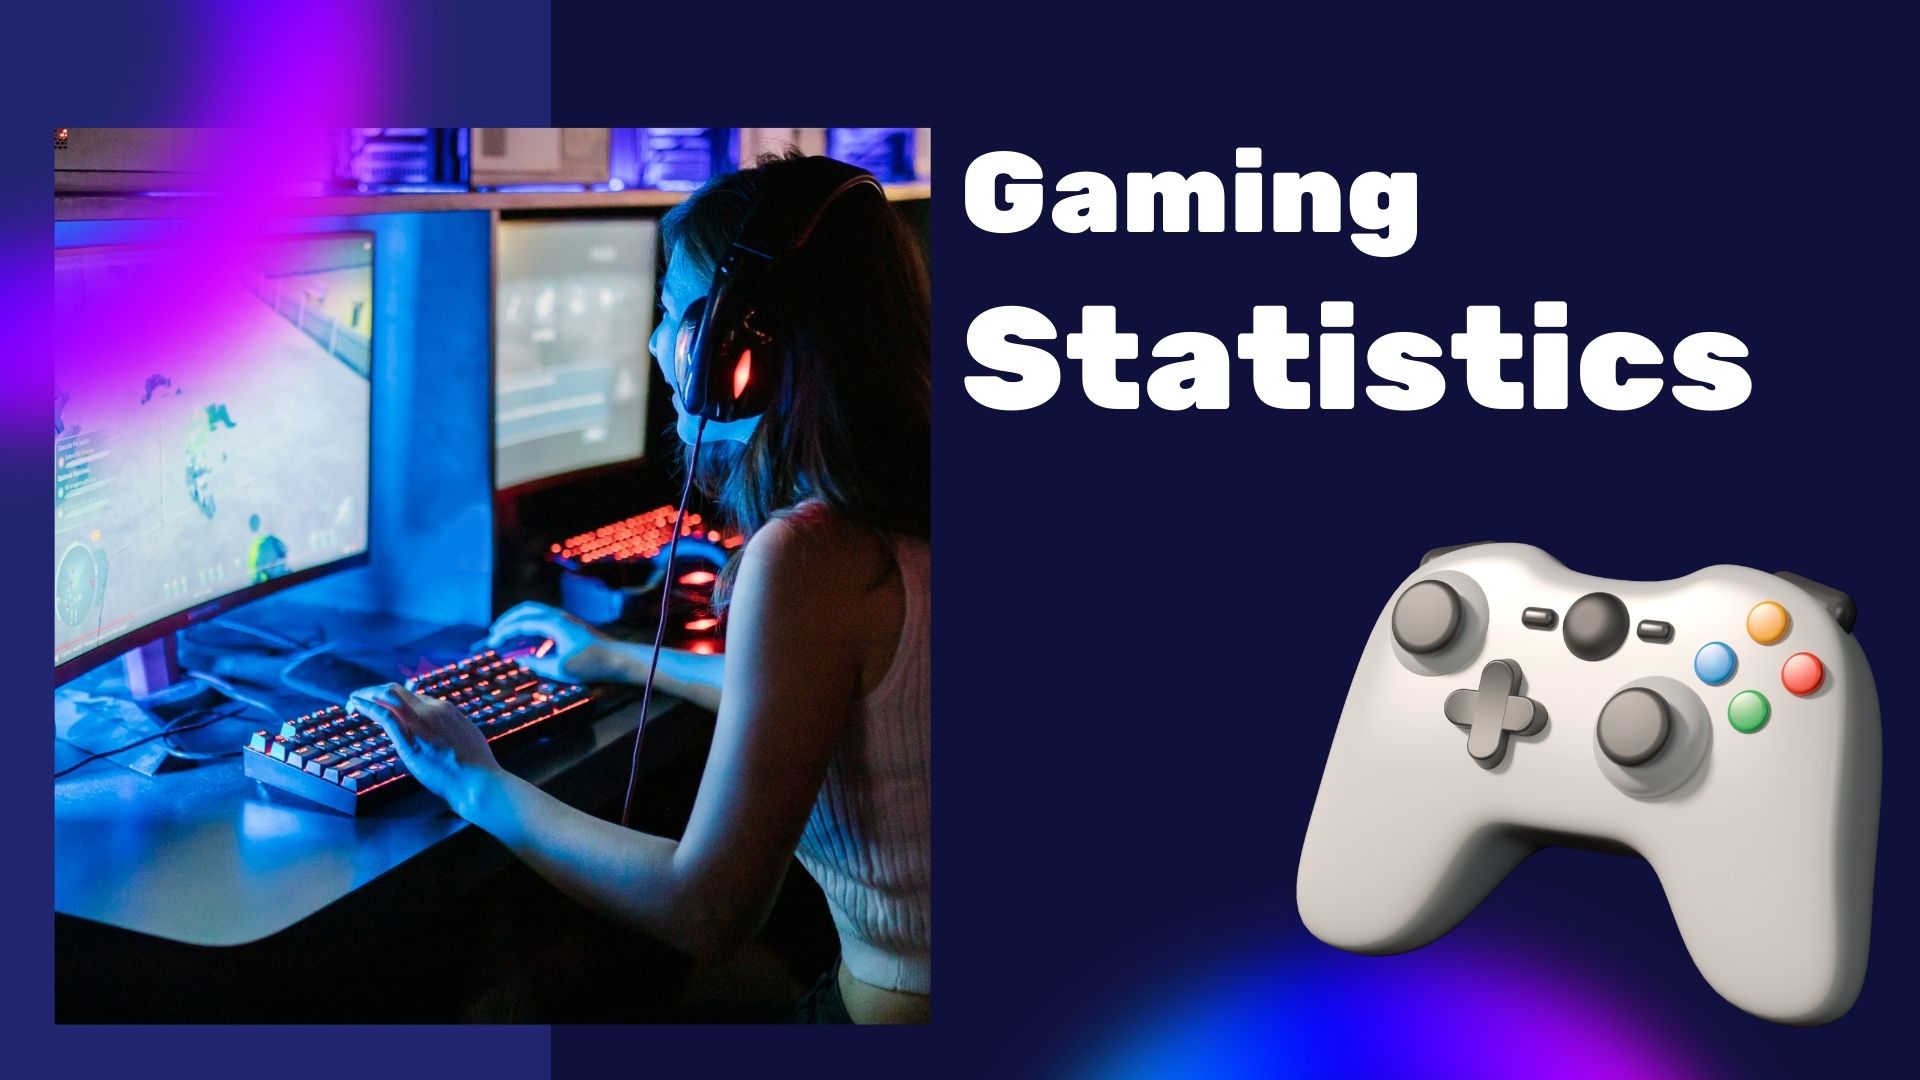 Video Gaming Statistics – By Countries, Market Growth, Region, Company, Demographics, Addiction, Type, Subscriptions